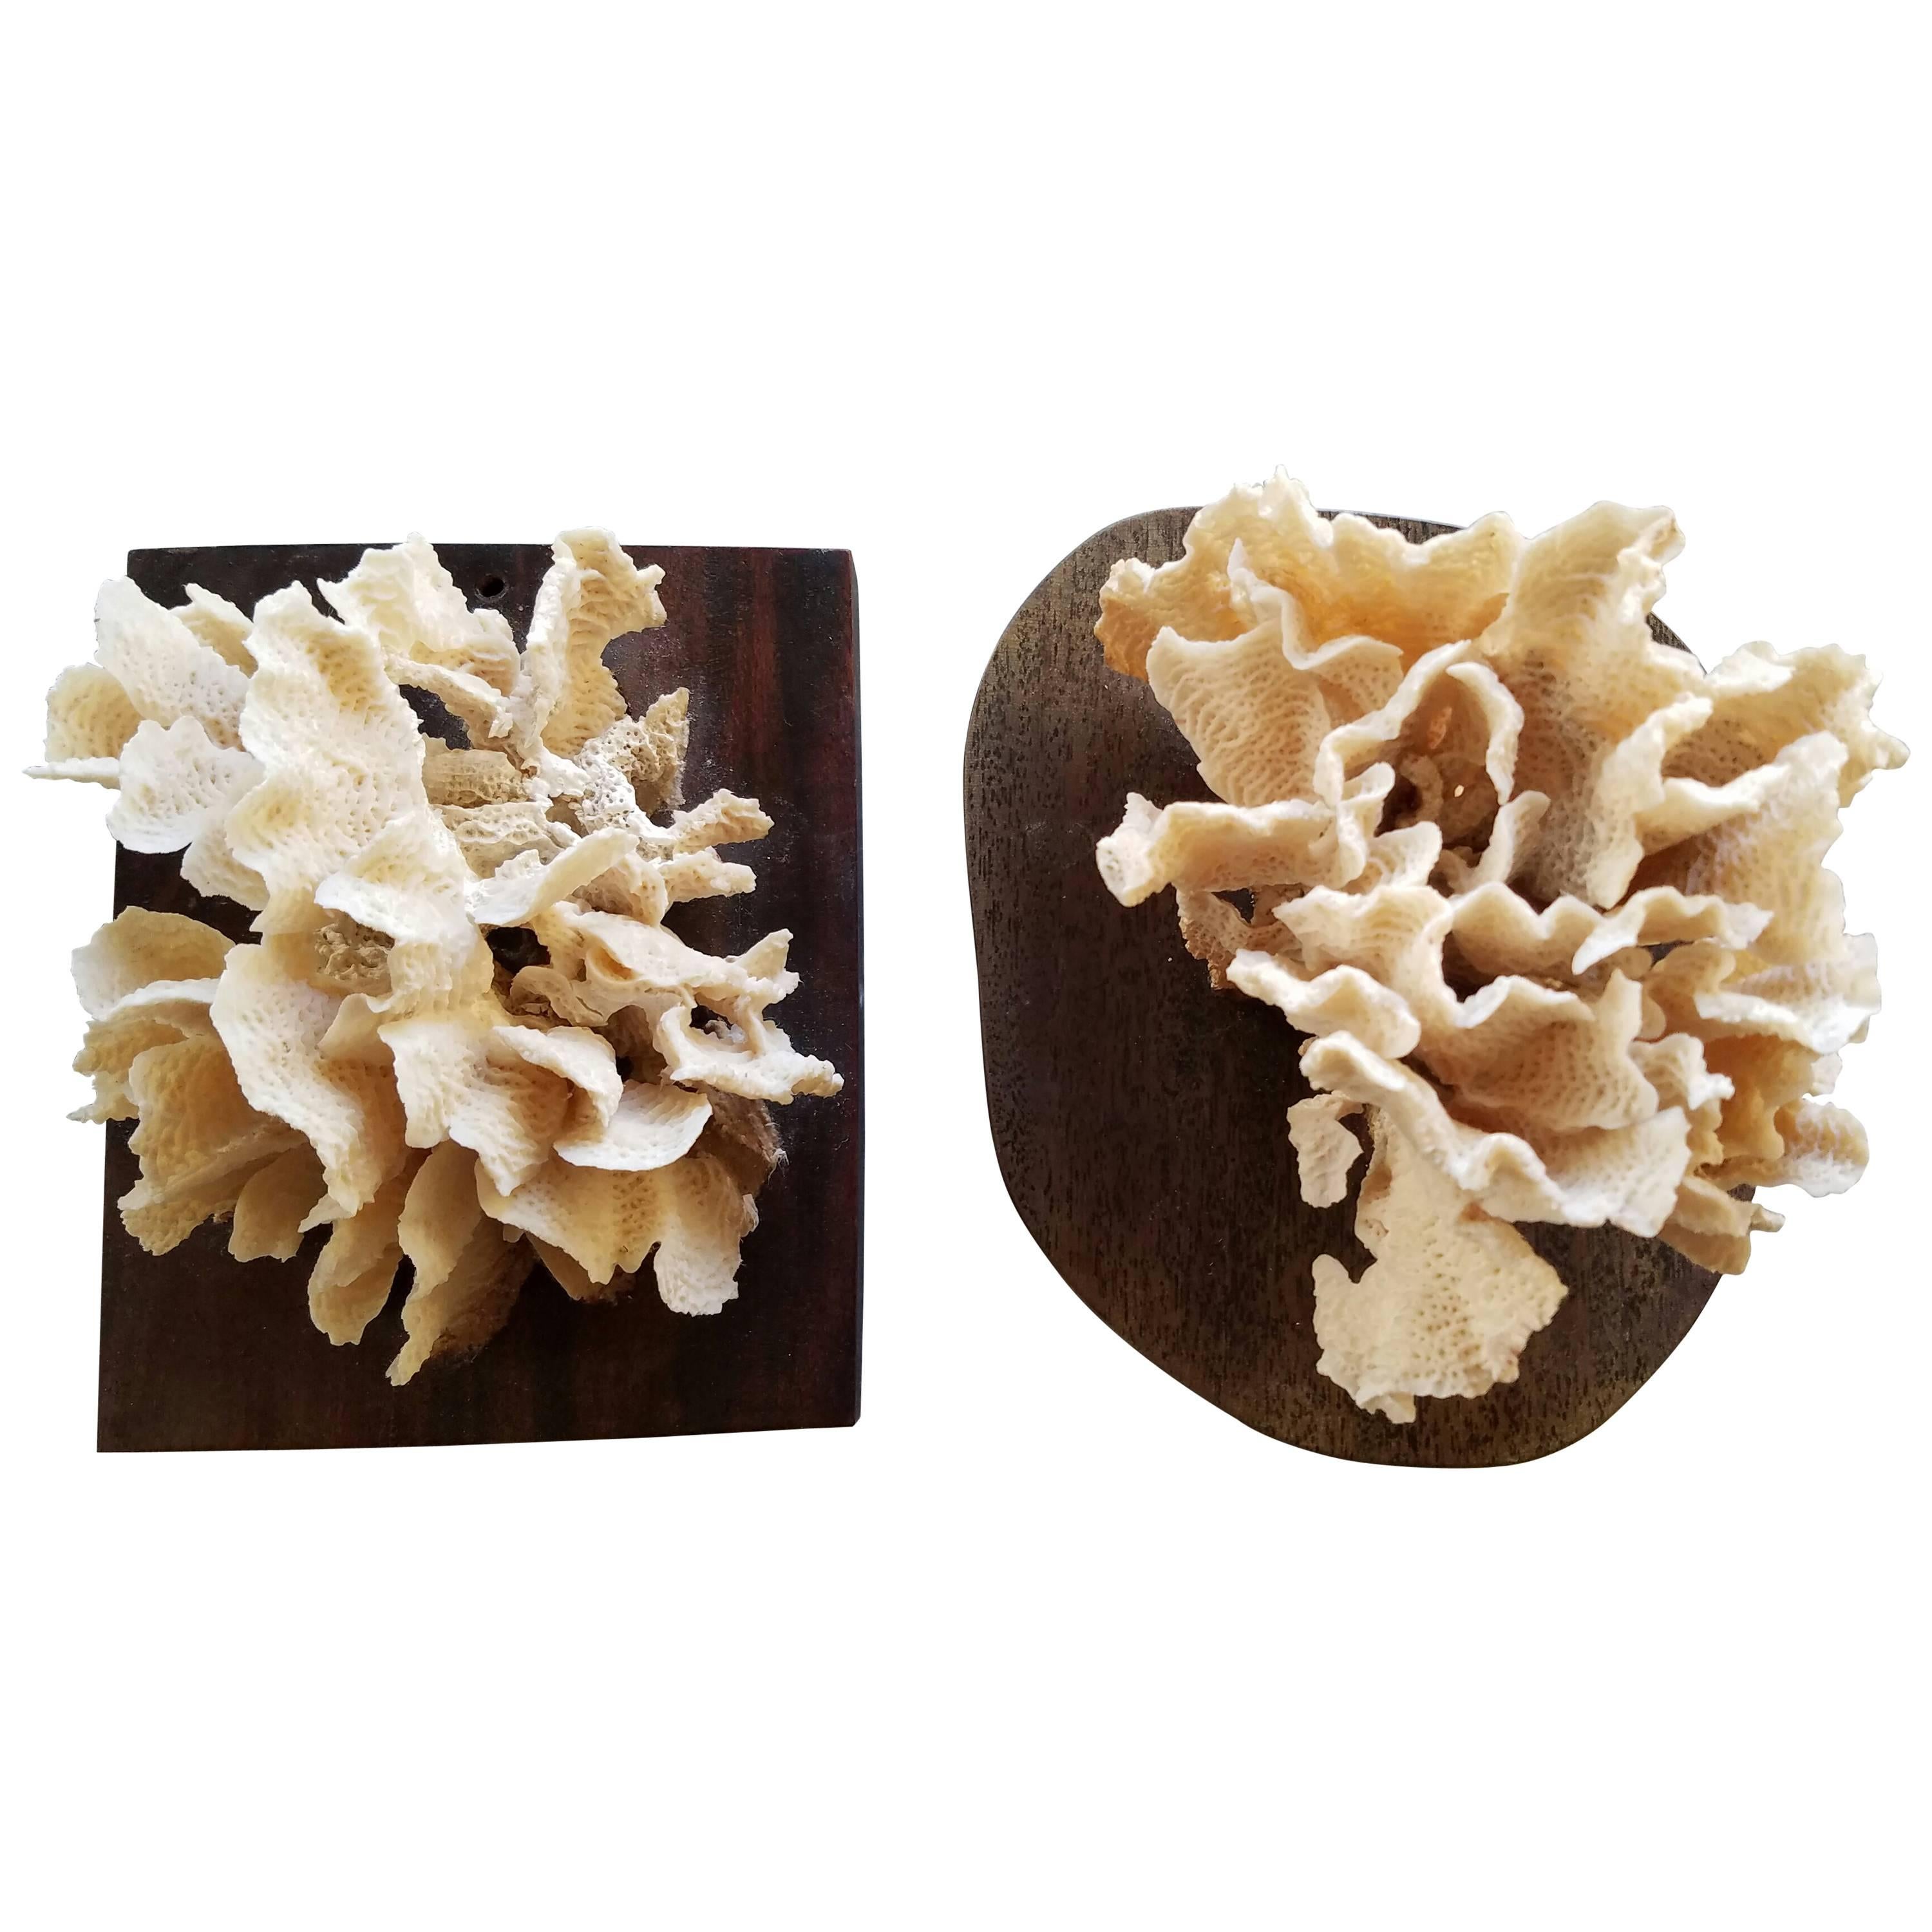 Pair of Cream White Coral Specimens Mounted on Wood For Sale